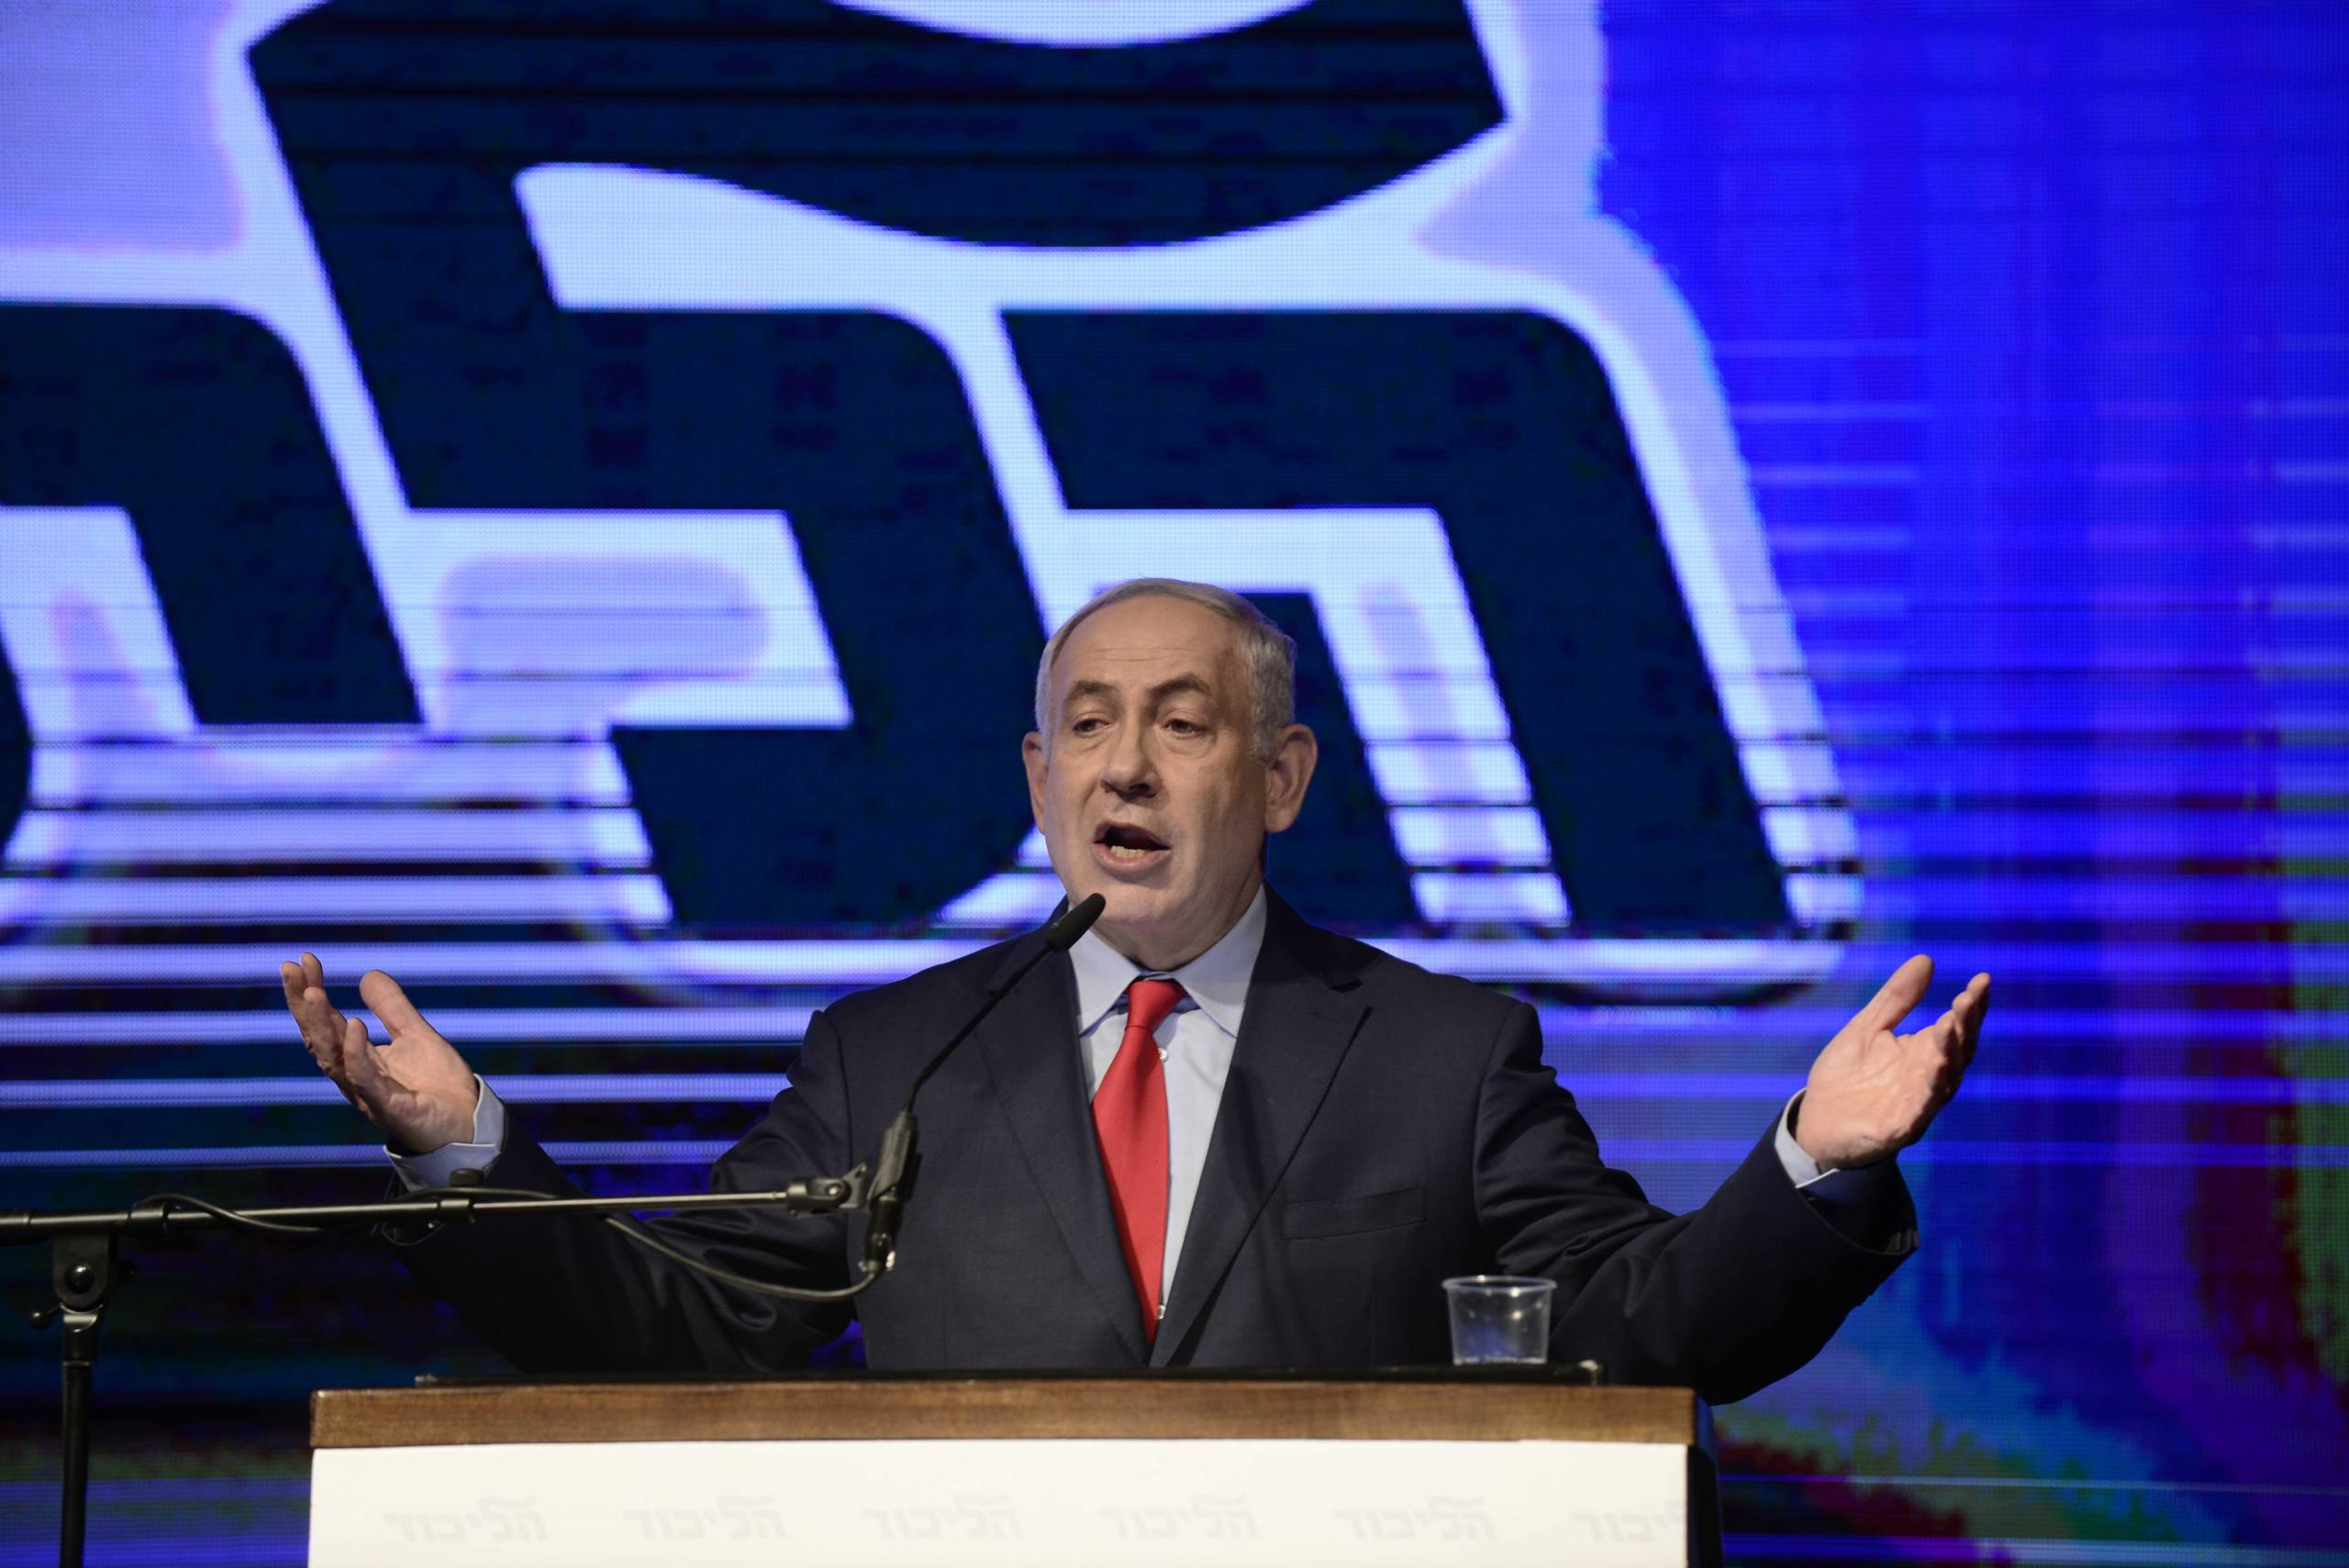 Prime Minister Benjamin Netanyahu speaks at a rally in his support, as he and his wife face legal investigations, in Tel Aviv, on August 9, 2017. Photo by Tomer Neuberg/Flash90 *** Local Caption *** ???? ?????
?????
??????
??????
????
?????
????
?????
??? ??????
?????? ??????
?? ????
???? ????